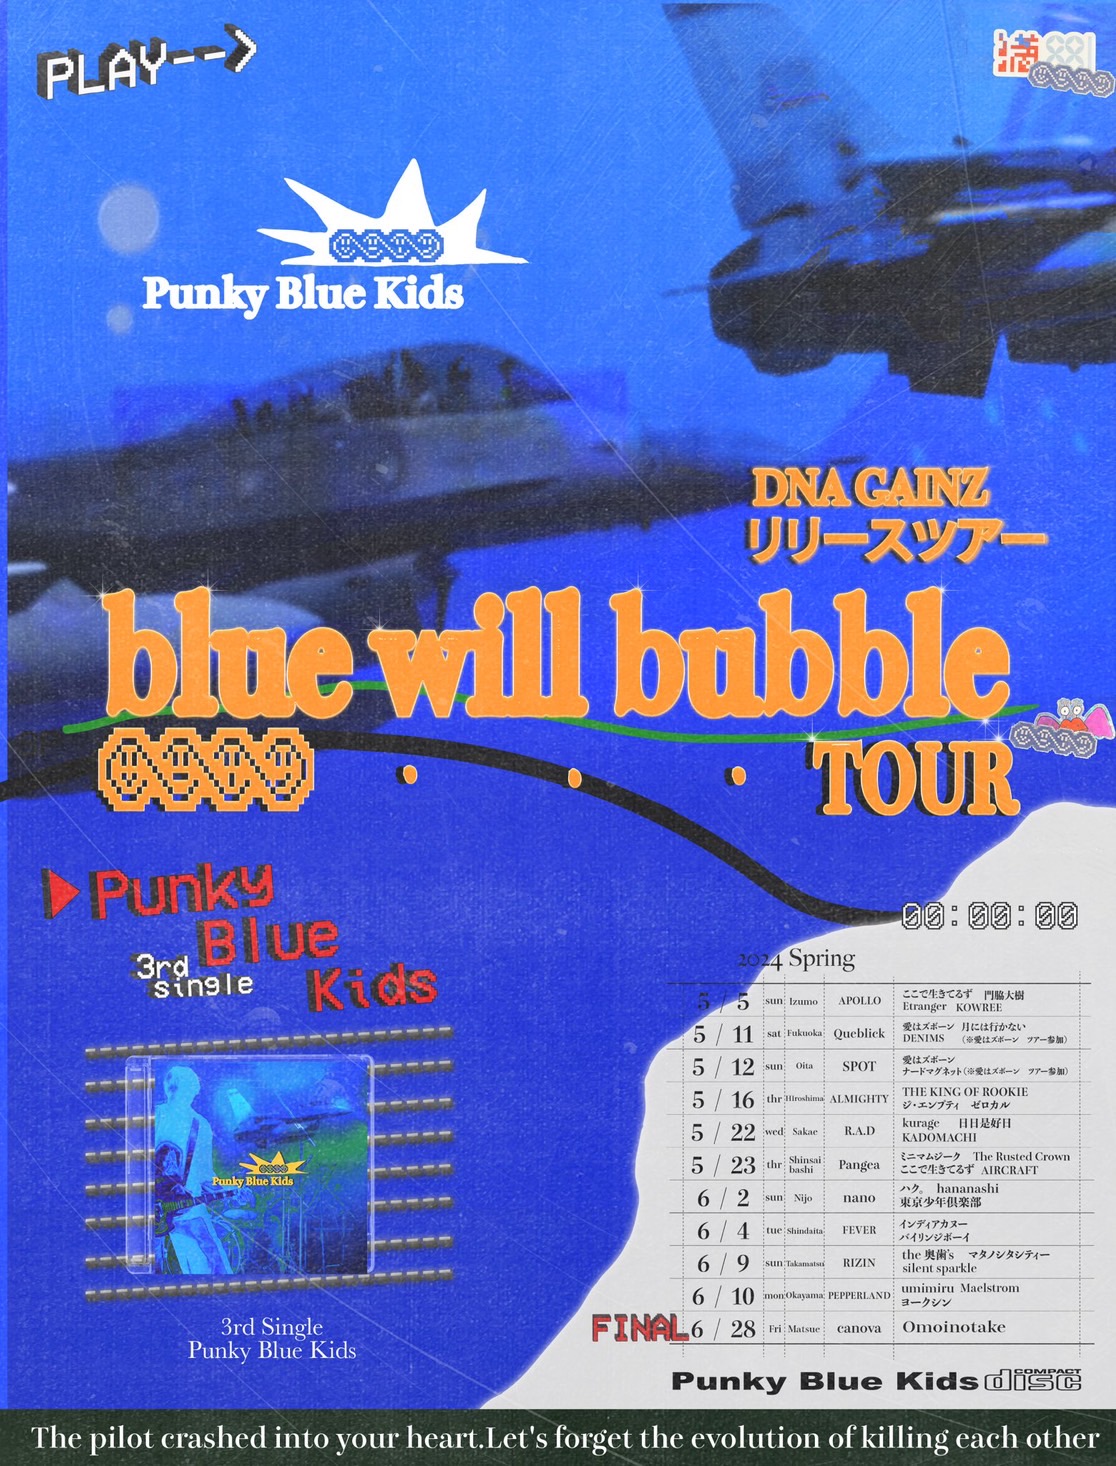 DNA GAINZ リリースツアー「blue will bubble TOUR」